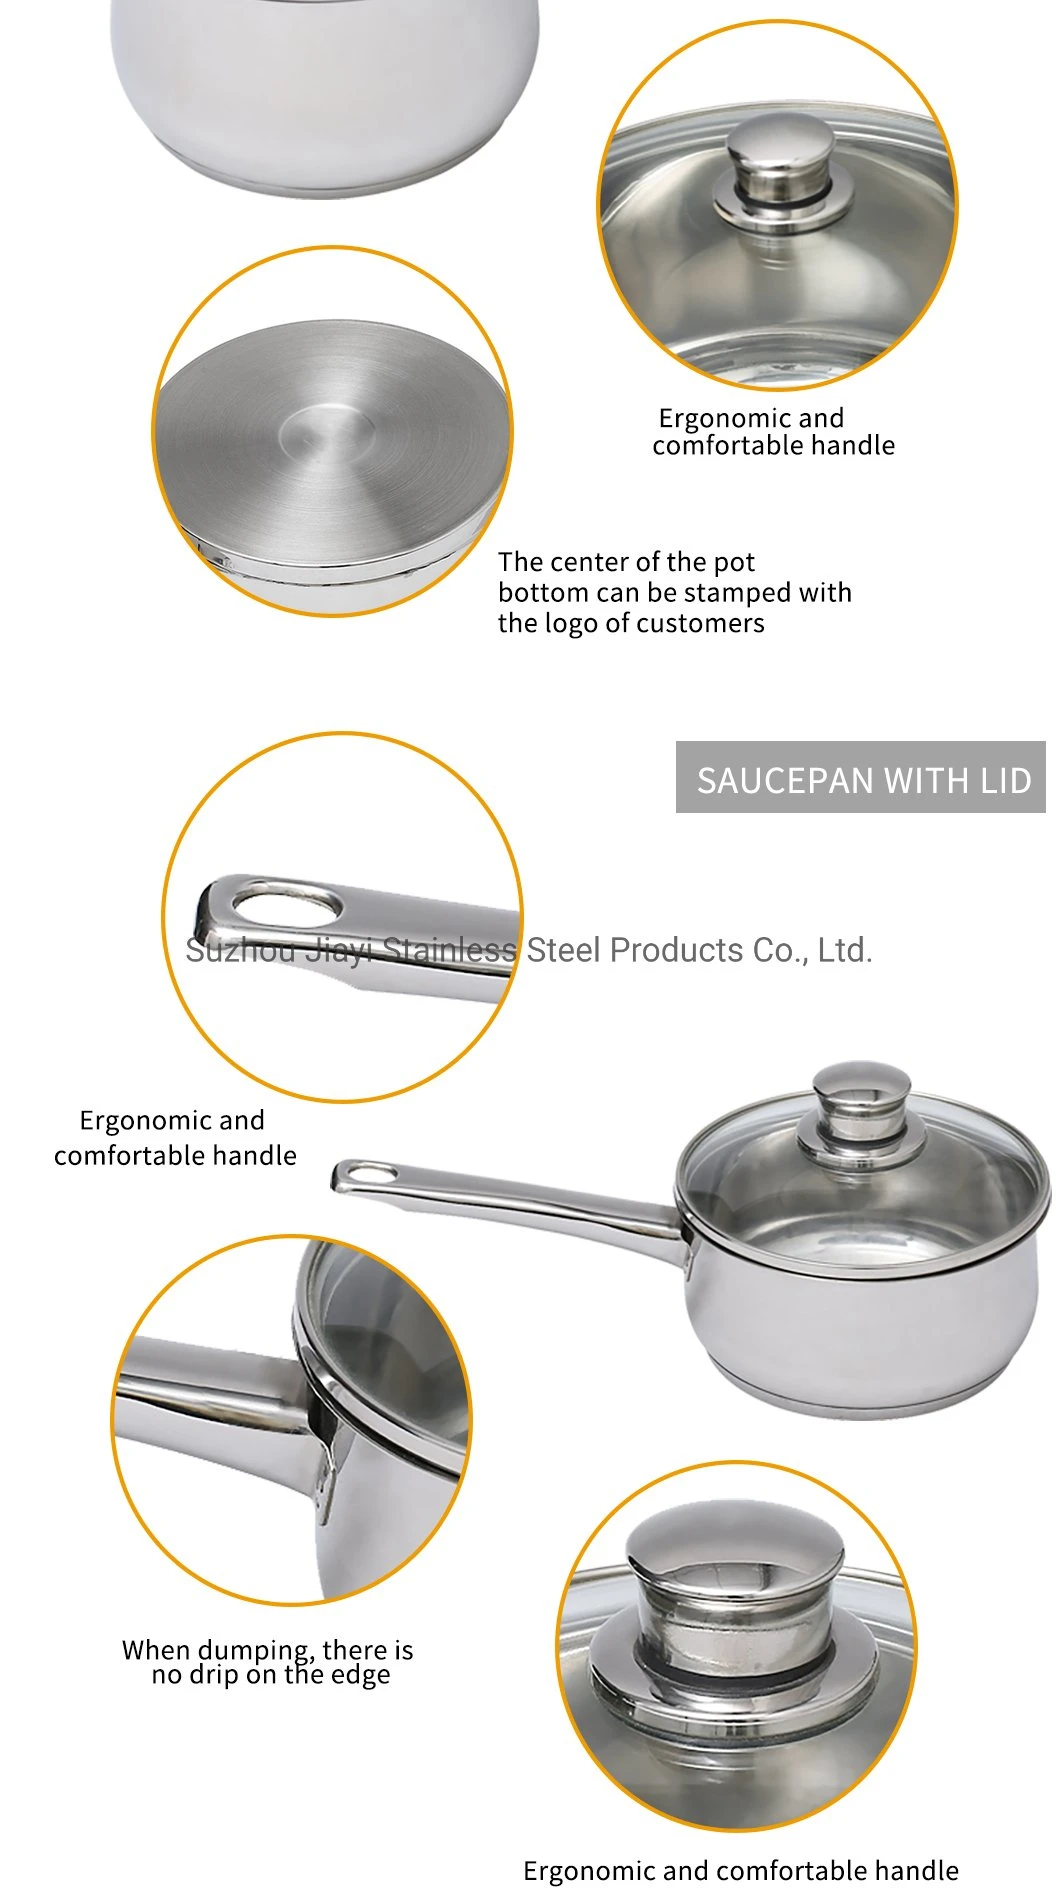 High Quality SUS304 Cookware Set Kitchen Pots with Non Stick Frypan and Saucepan and Casseroles